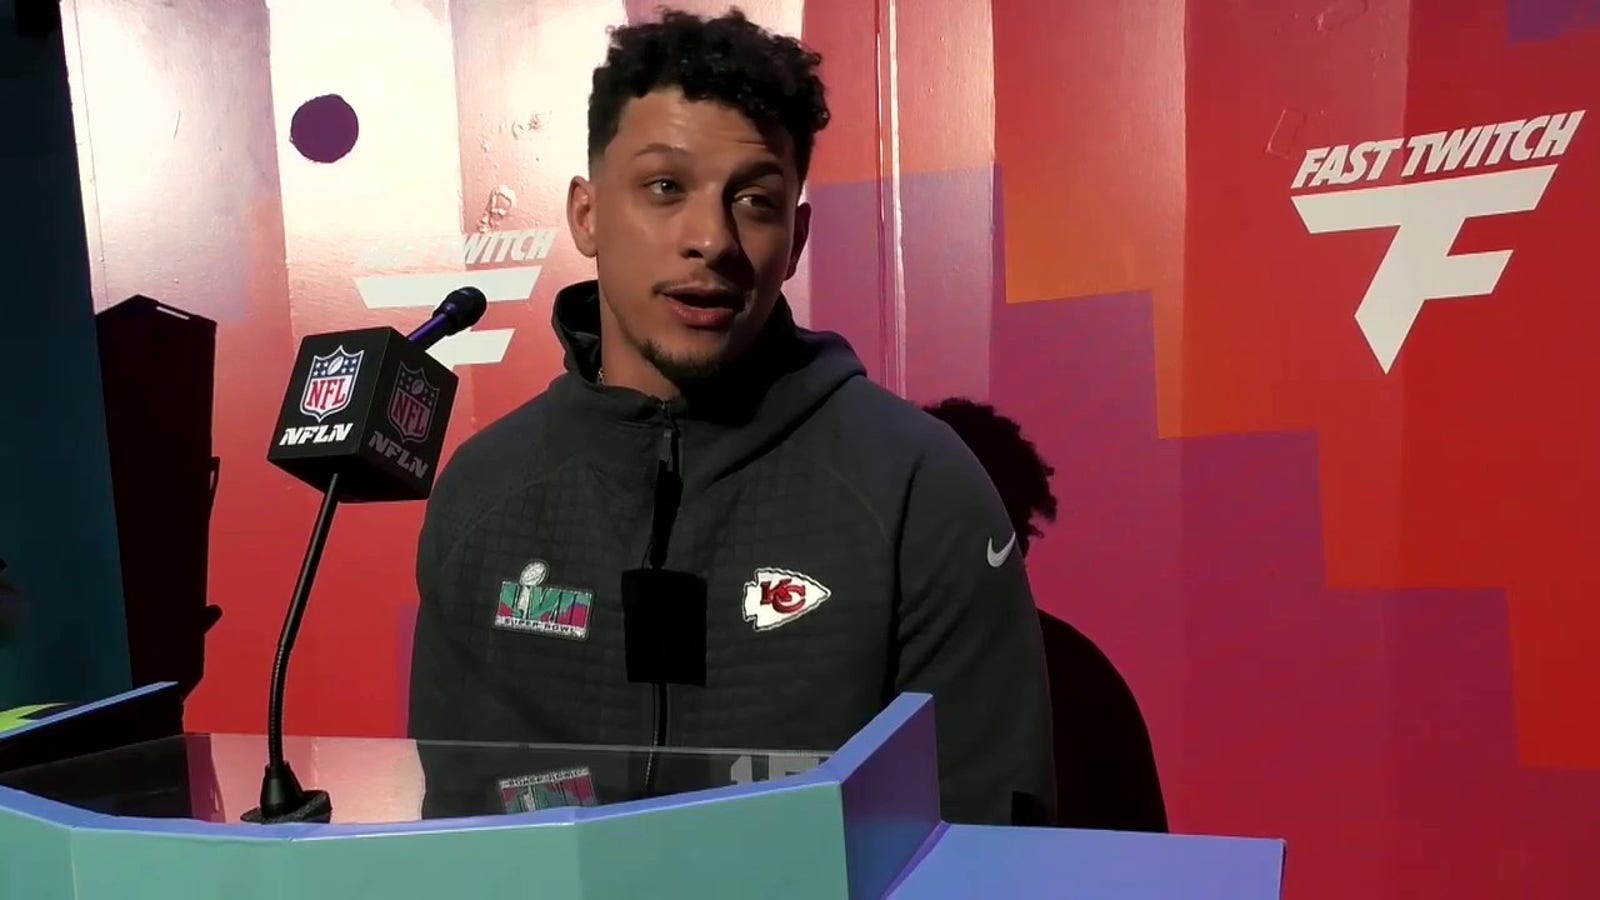 Chiefs' QB Patrick Mahomes on learning from dad, leading by example